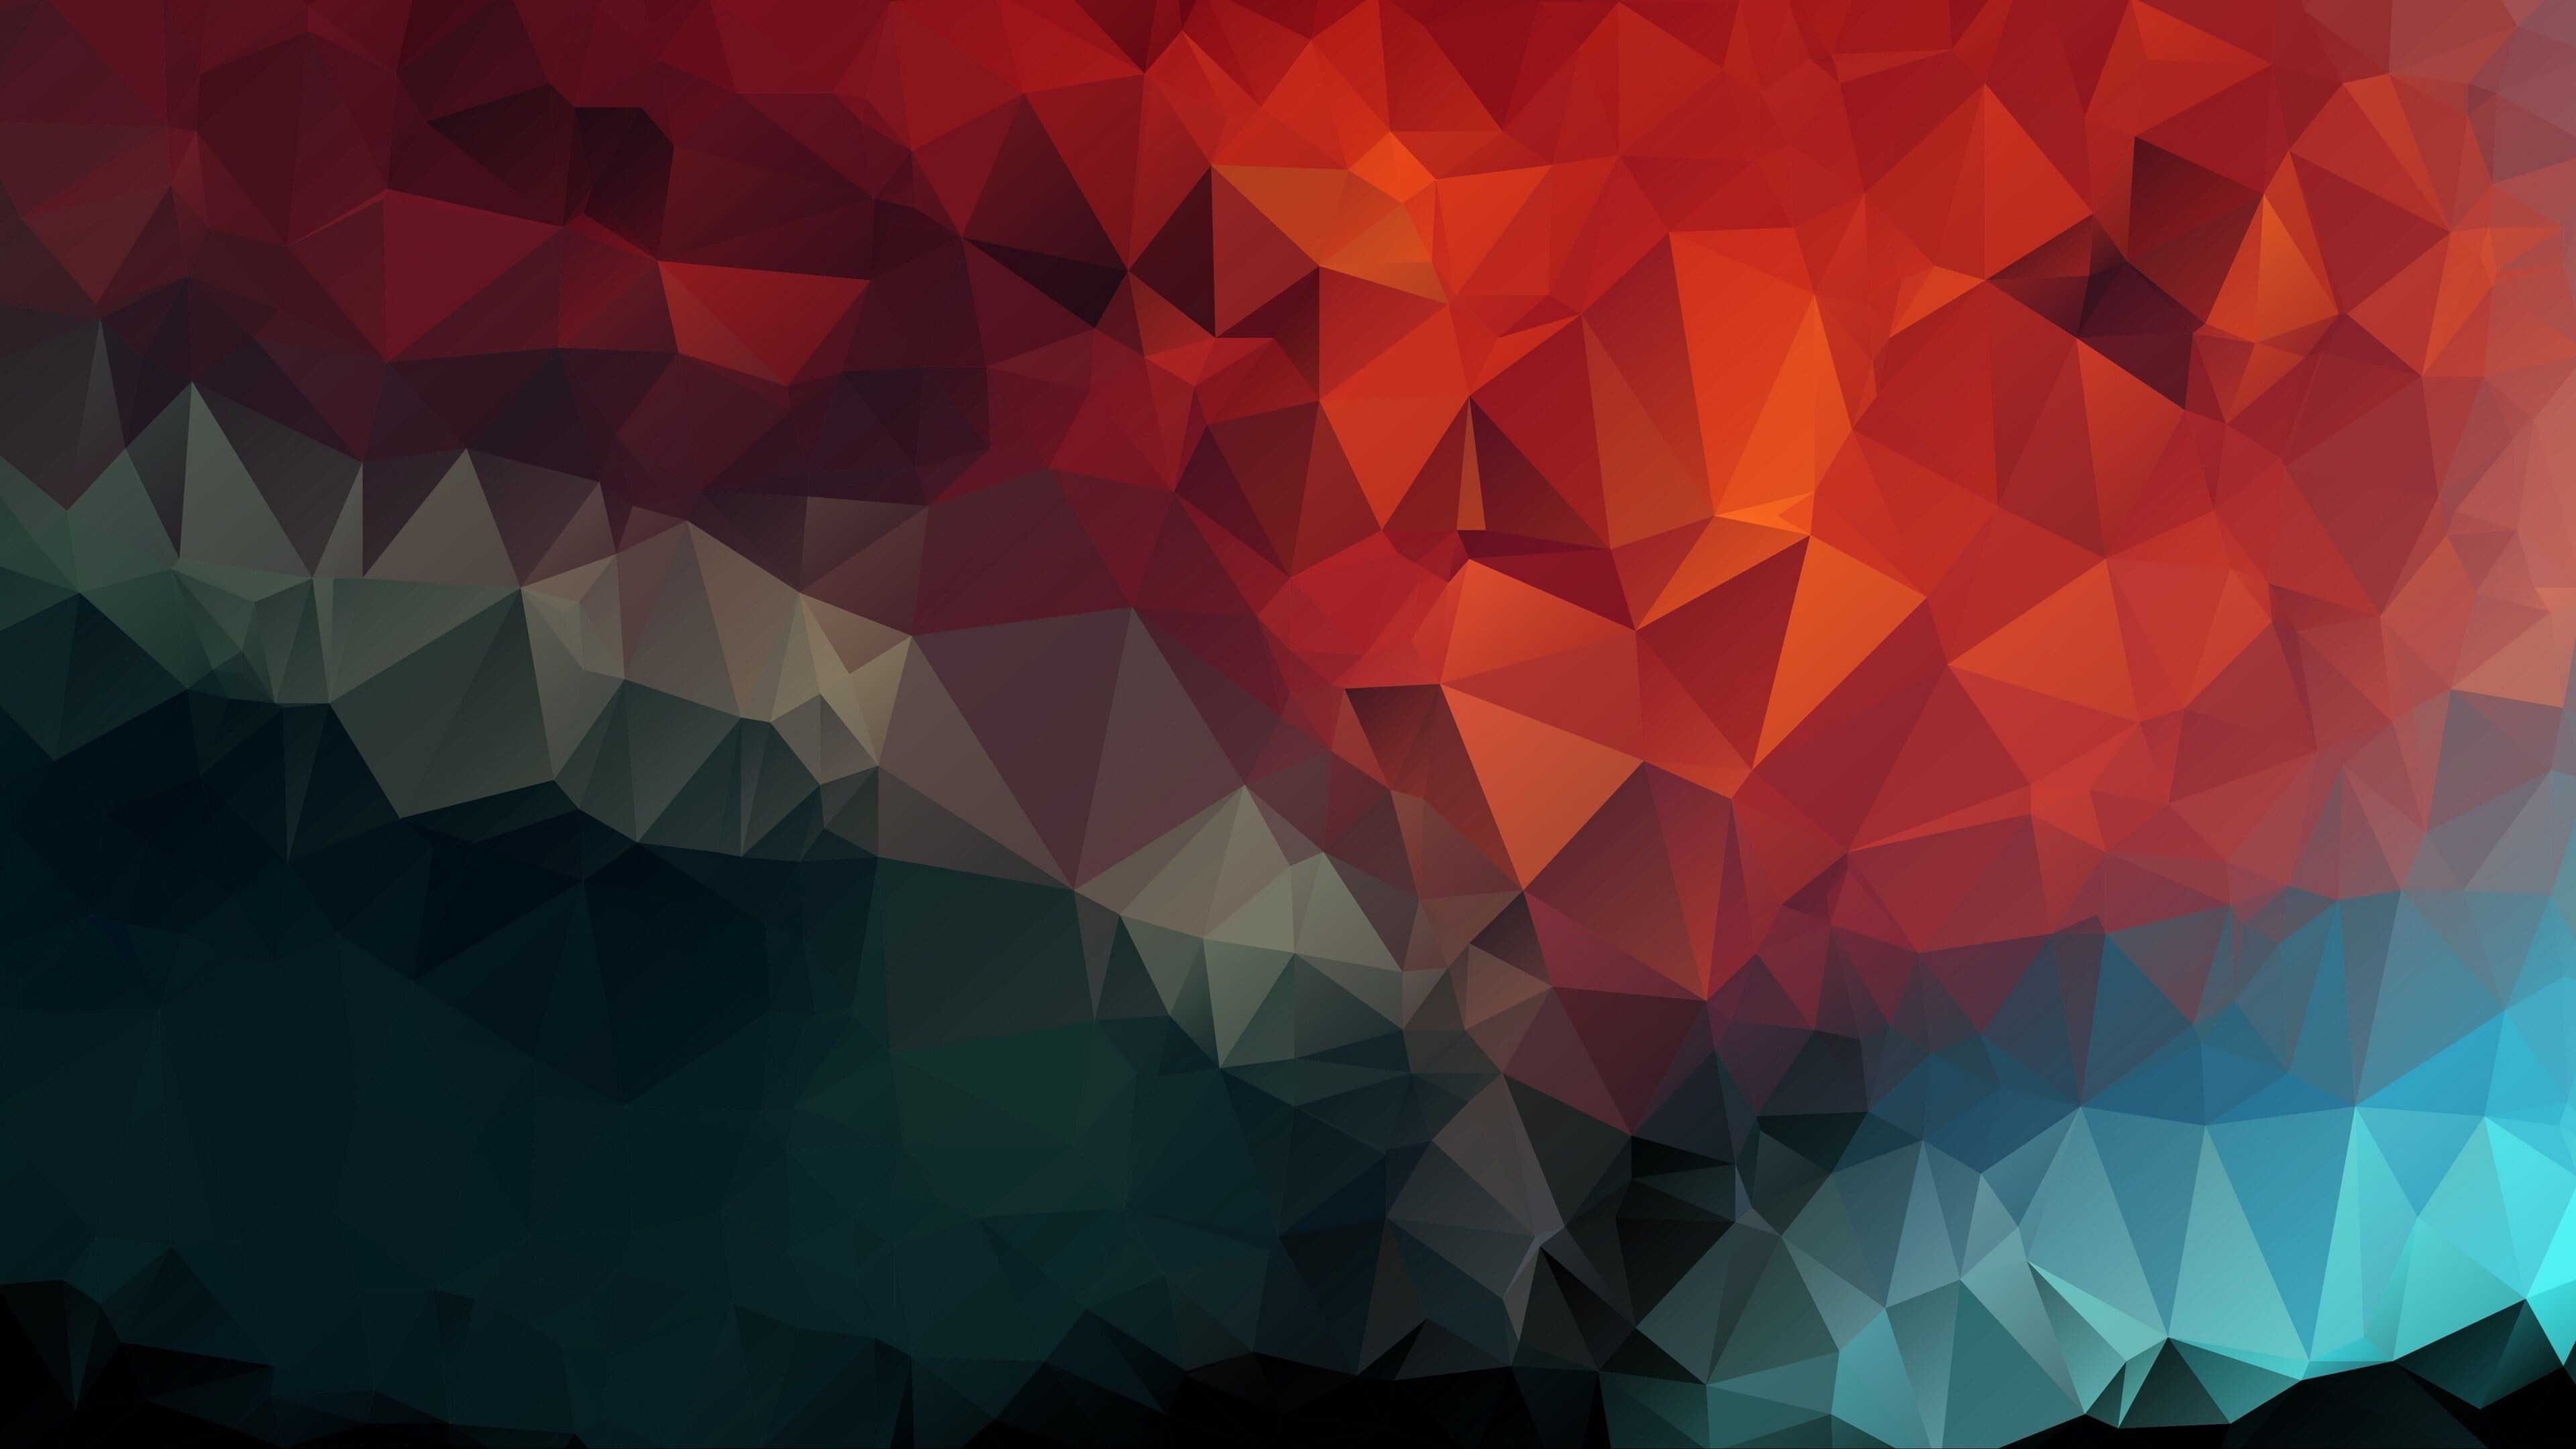 Geometric Abstract: Polygonal pattern, Triangle, Colorful, Obtuse angles. 3840x2160 4K Wallpaper.